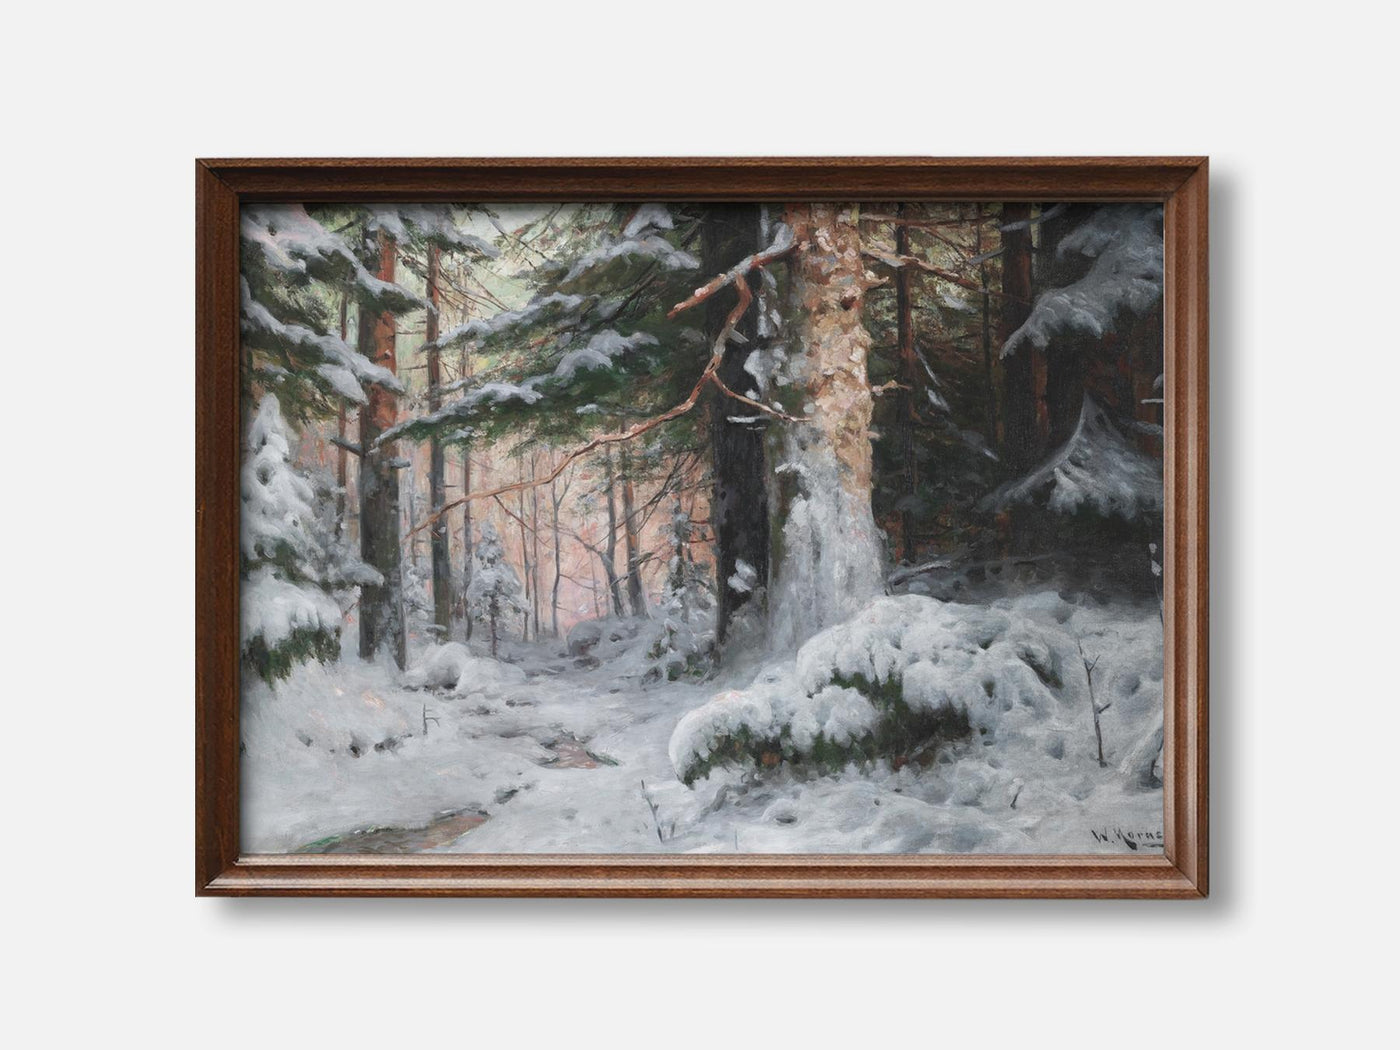 The Snowy Pine Forest mockup - A_w31-V1-PC_F+WA-SS_1-PS_5x7-C_def variant